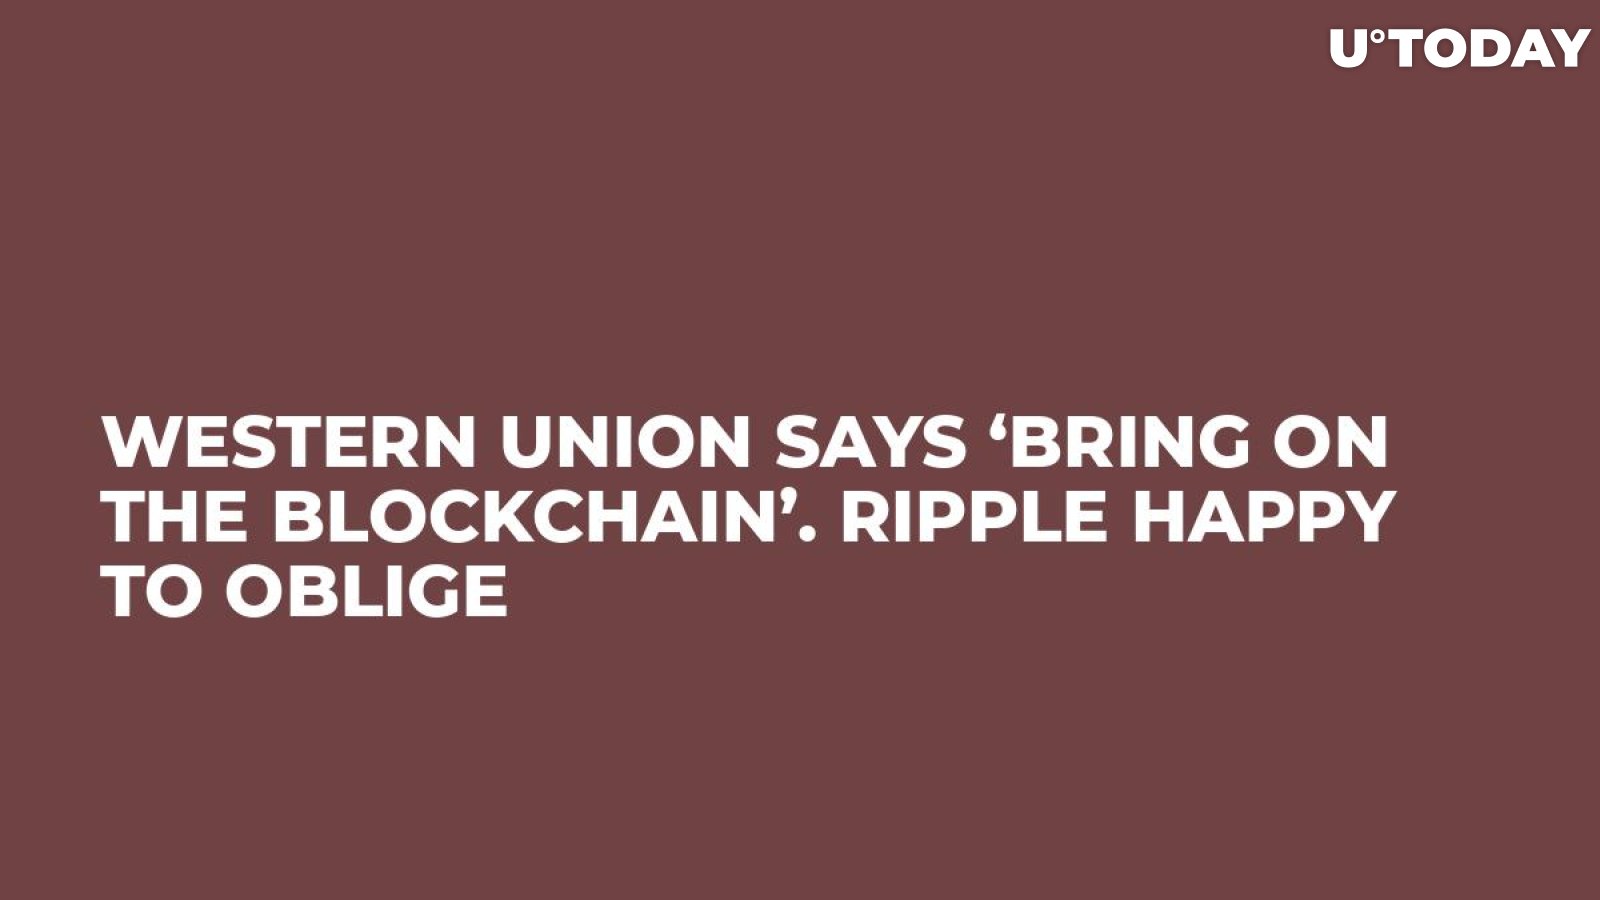 Western Union Says ‘Bring On the Blockchain’. Ripple Happy to Oblige